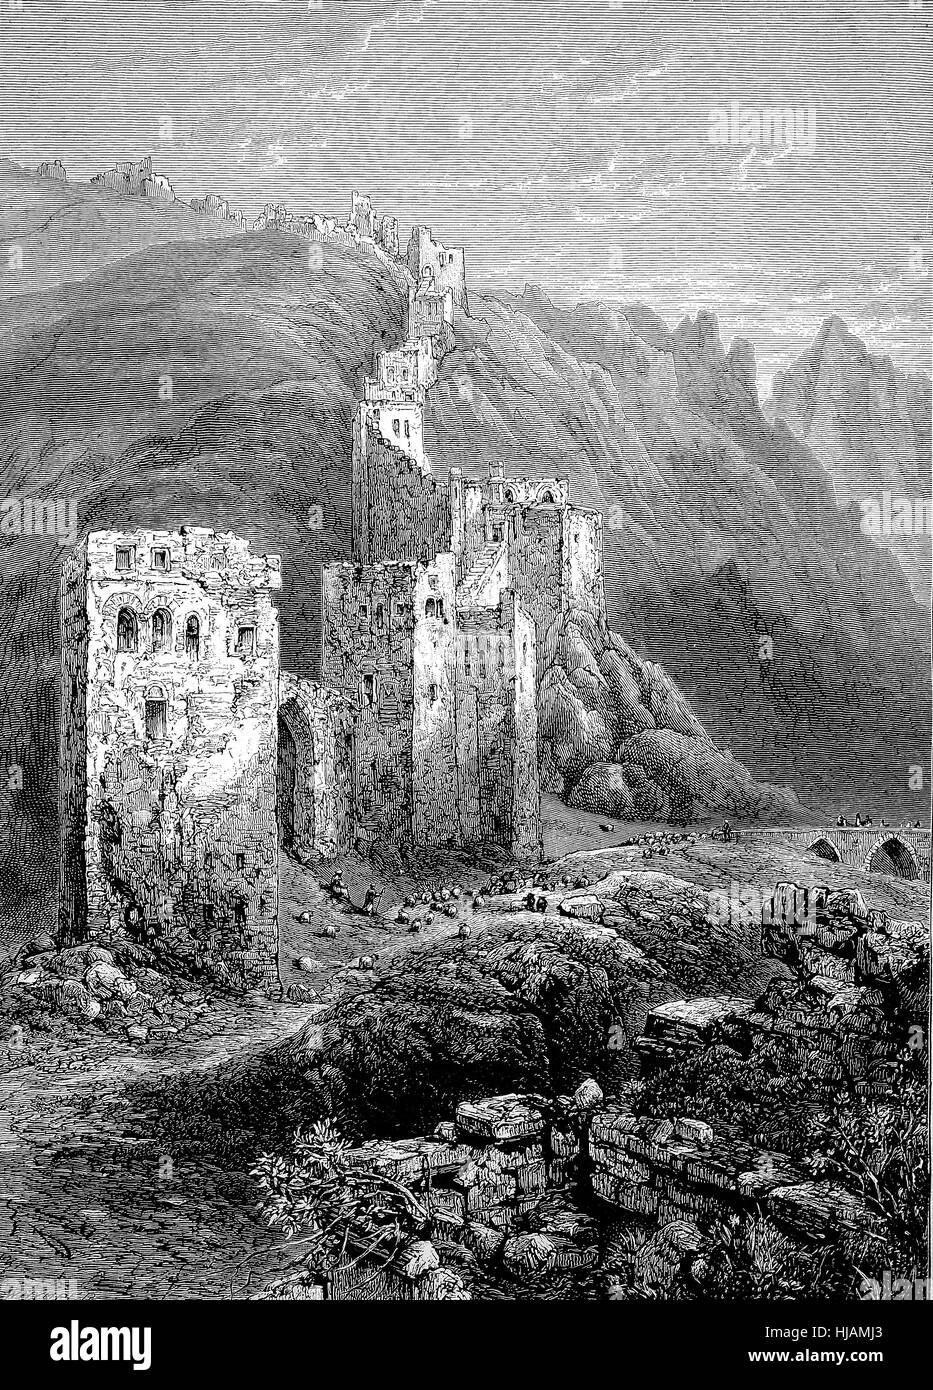 the walls of Antioch on the Orontes, an ancient Greco-Roman city, eastern side of the Orontes River. Its ruins lie near the modern city of Antakya, Turkey, historical image or illustration from the year 1894, digital improved Stock Photo